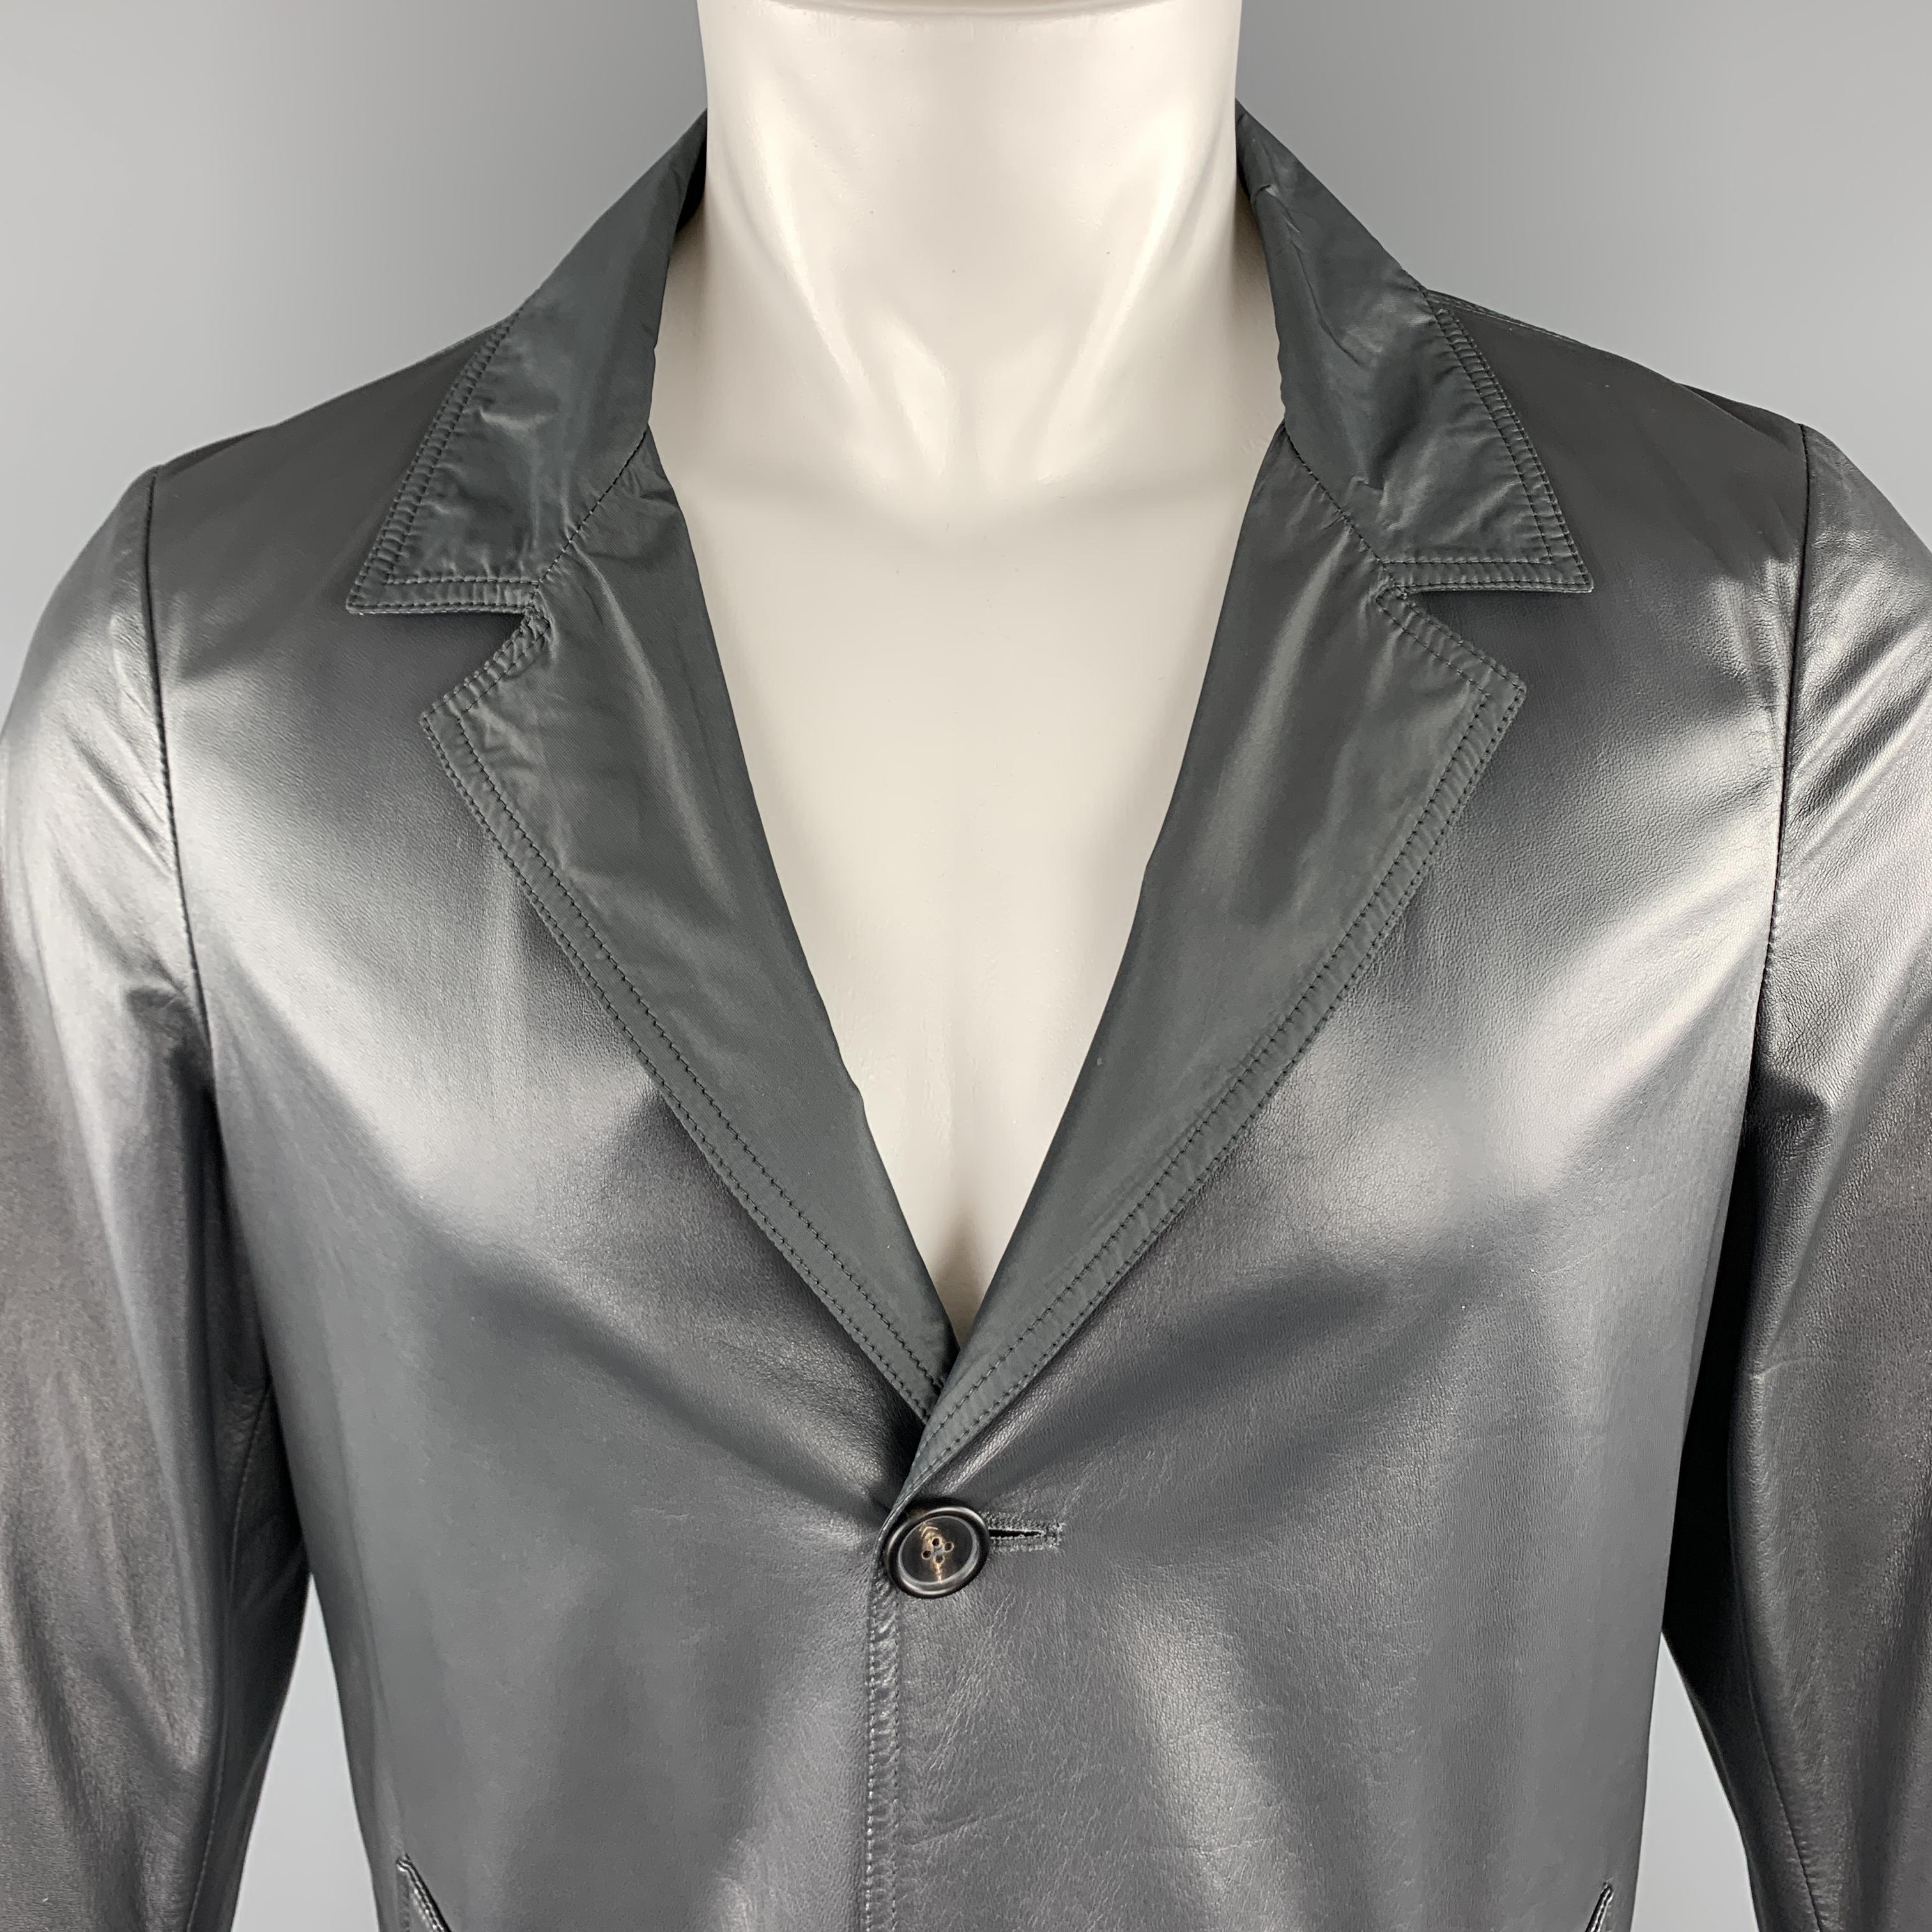 JIL SANDER coat comes in soft gray leather with a notch lapel, single breasted, three button closure, slit pockets, and reverse nylon side. Wear on liner. As-is. Otherwise Excellent condition. Made in Italy.

Very Good Pre-Owned Condition.
Marked: